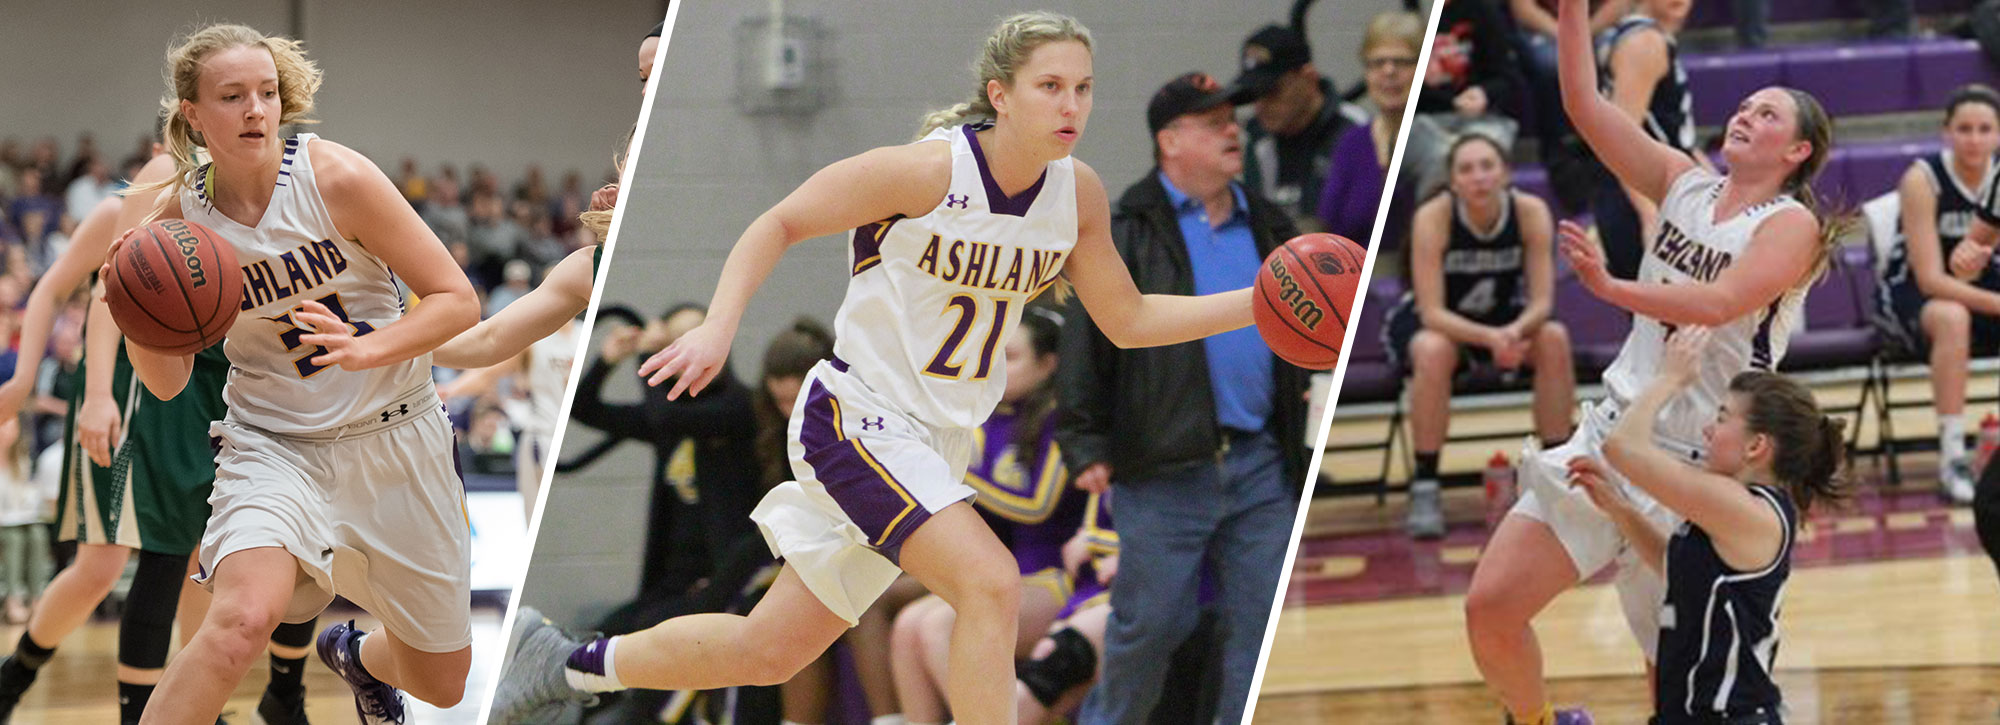 Ashland's Johnson, Snyder & Daugherty Earn D2CCA All-American Recognition